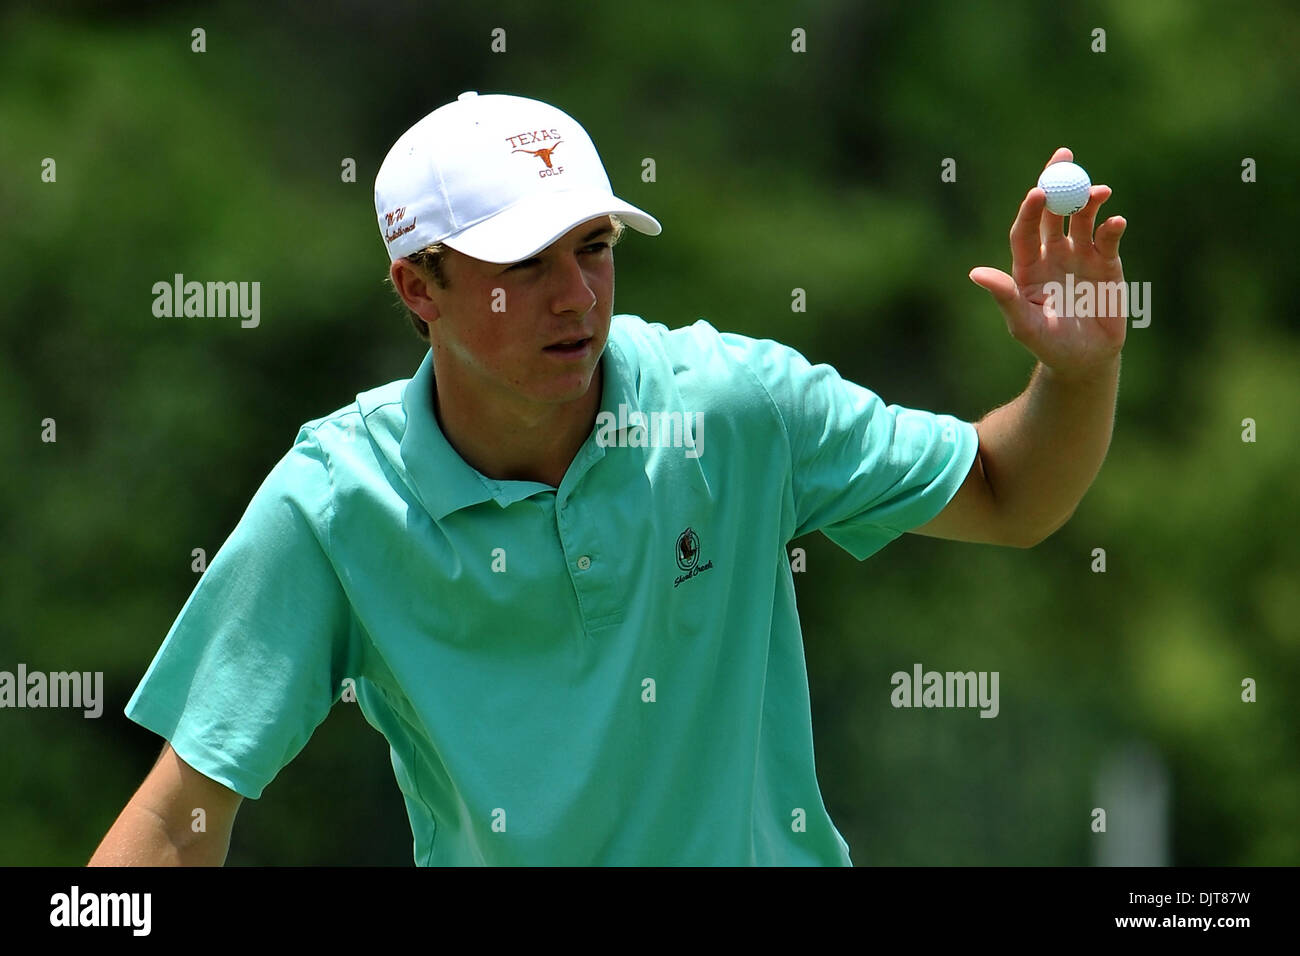 Jordan Spieth waves to the crowd during the HP Byron Nelson Championship at TPC Four Seasons Resort Las Colinas in Irving, Texas  (Credit Image: © Patrick Green/Southcreek Global/ZUMApress.com) Stock Photo